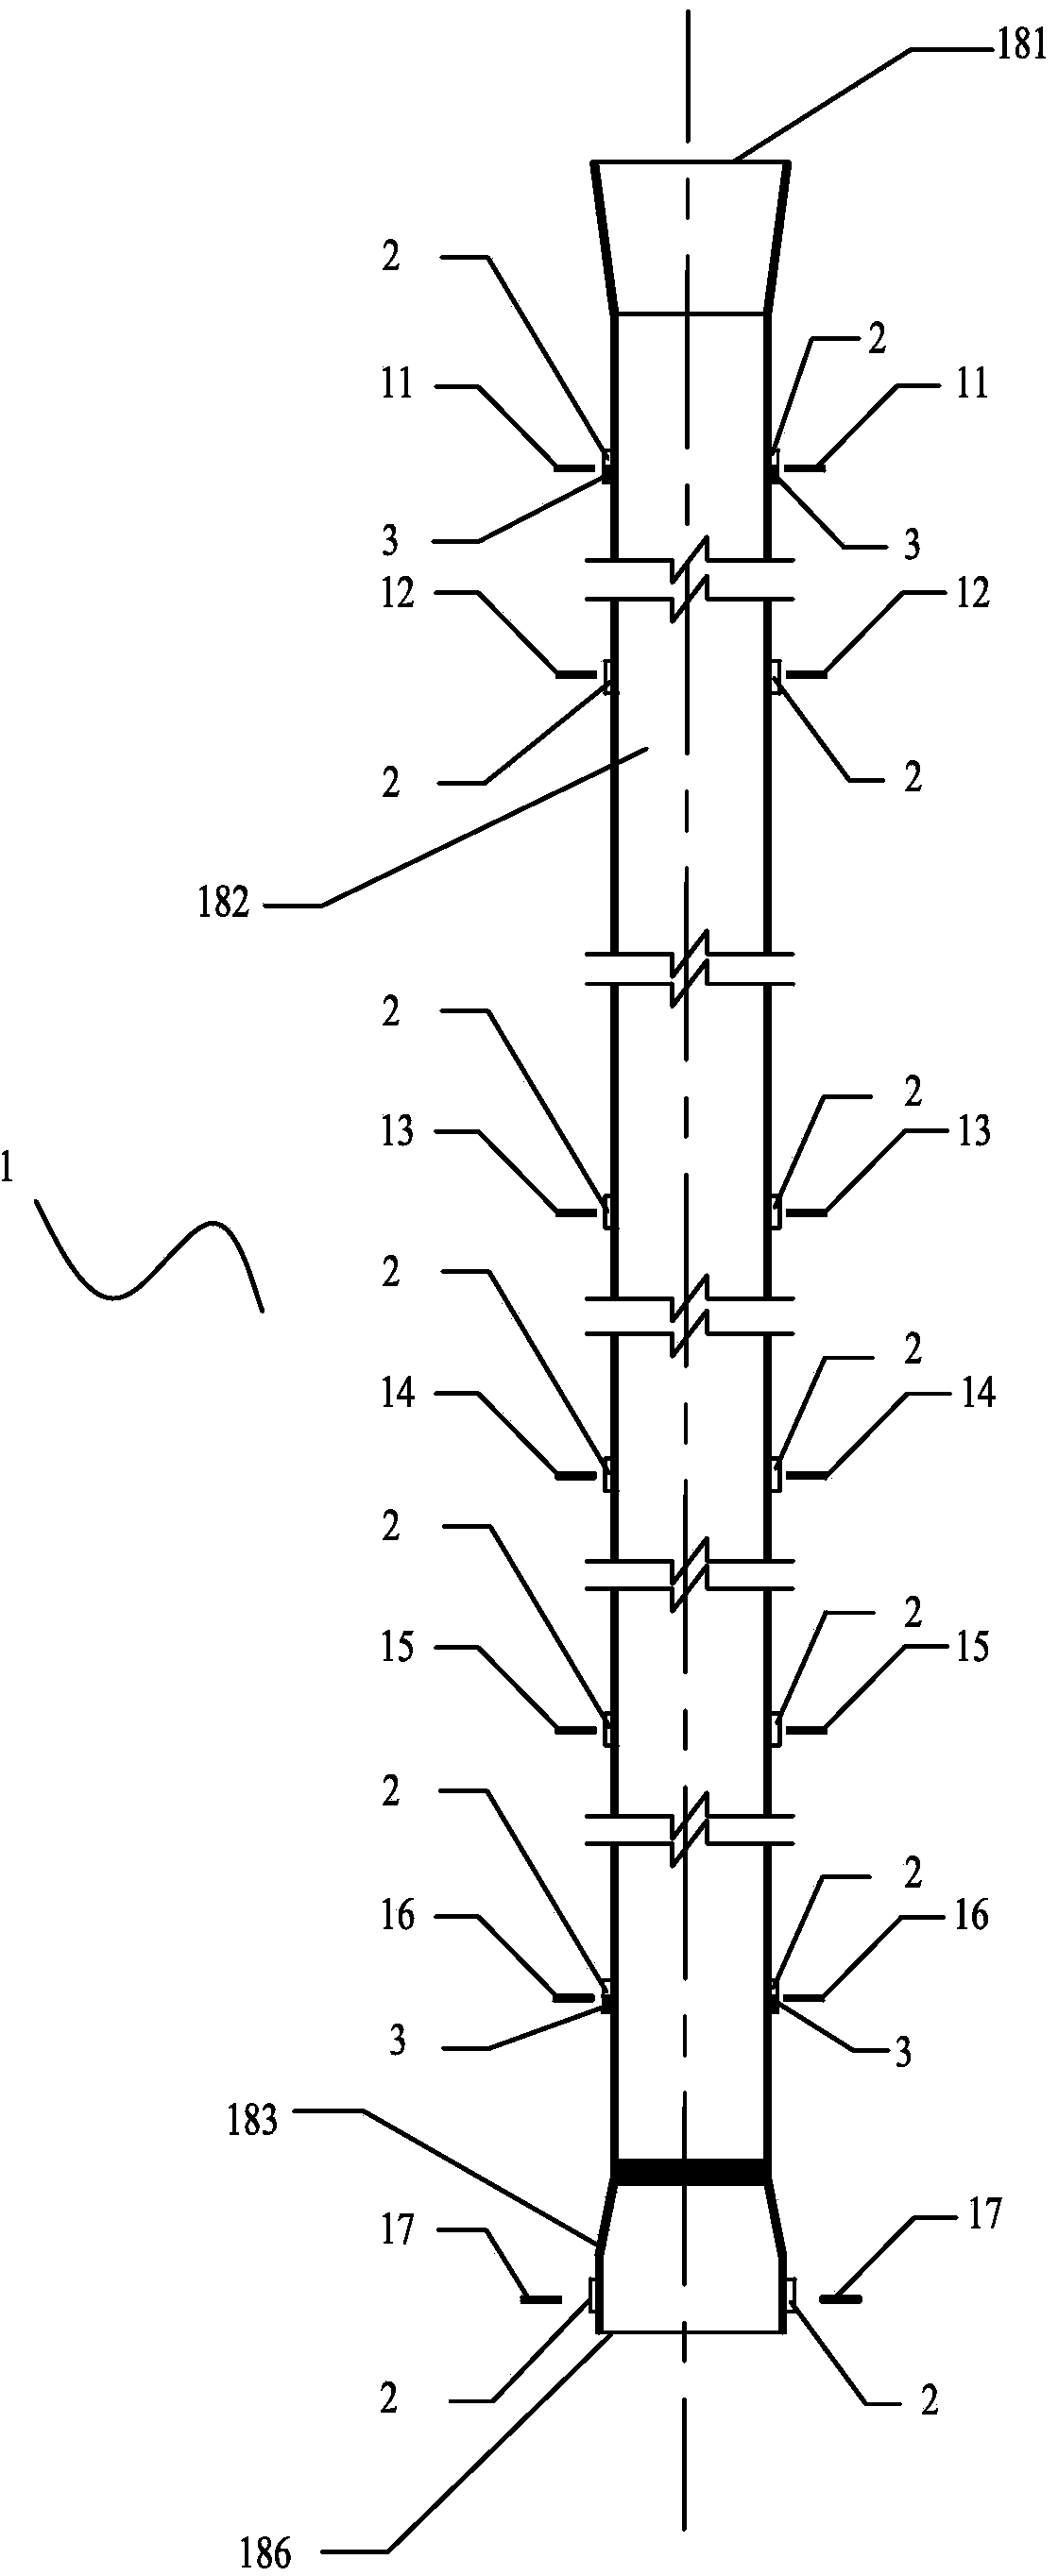 Pile-forming process dynamic testing device for underwater sand compaction pile